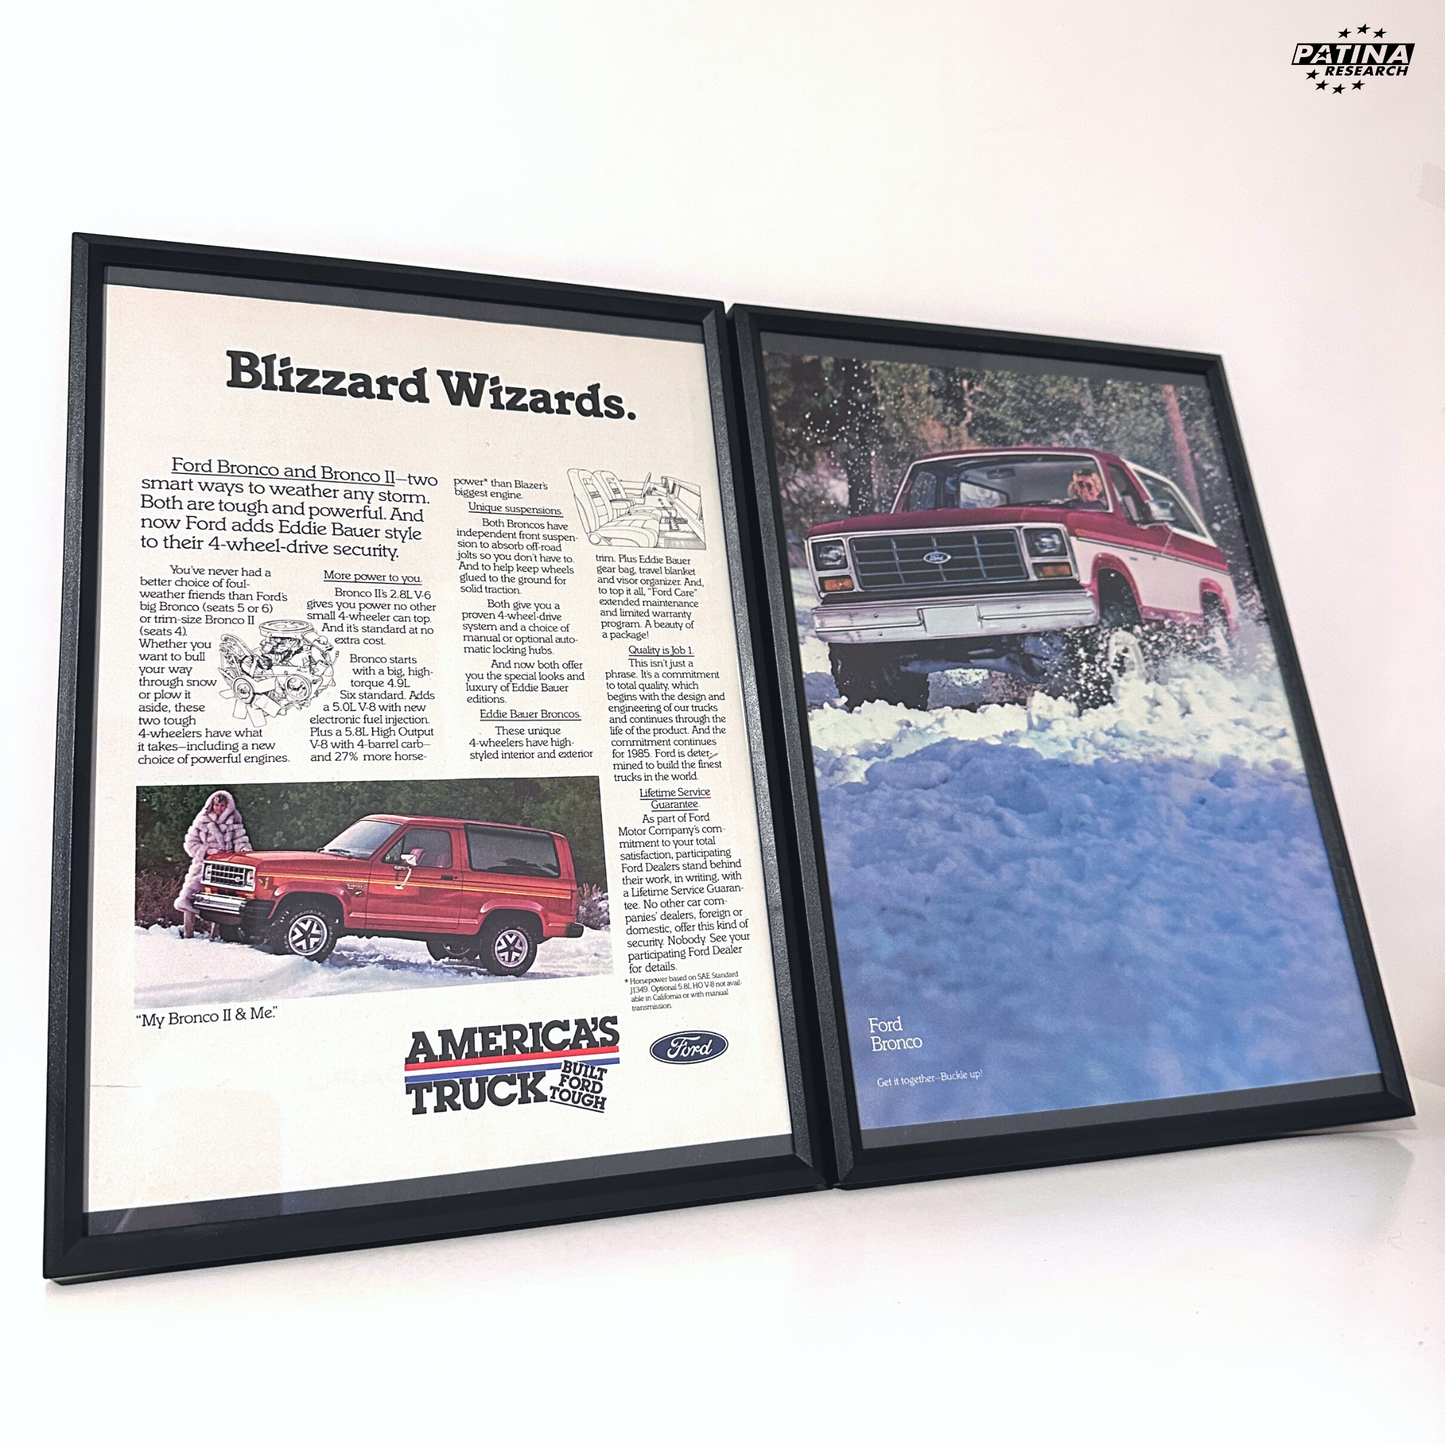 Blizzard wizards Ford bronco framed ad